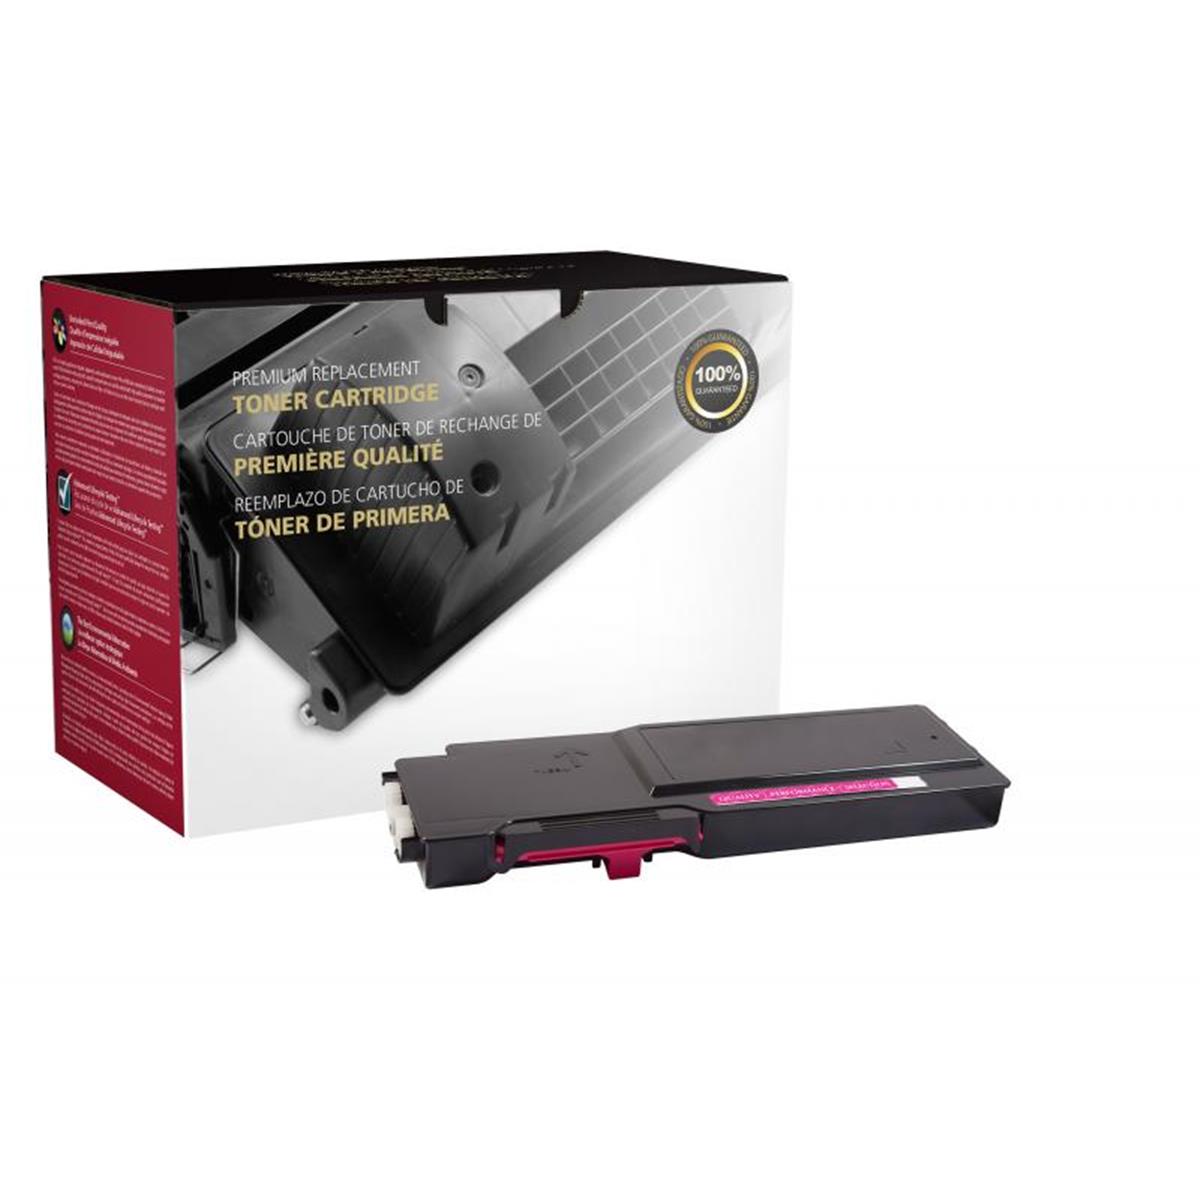 Picture of Dell 200812 High Yield Magenta Toner Cartridge for Dell C2660